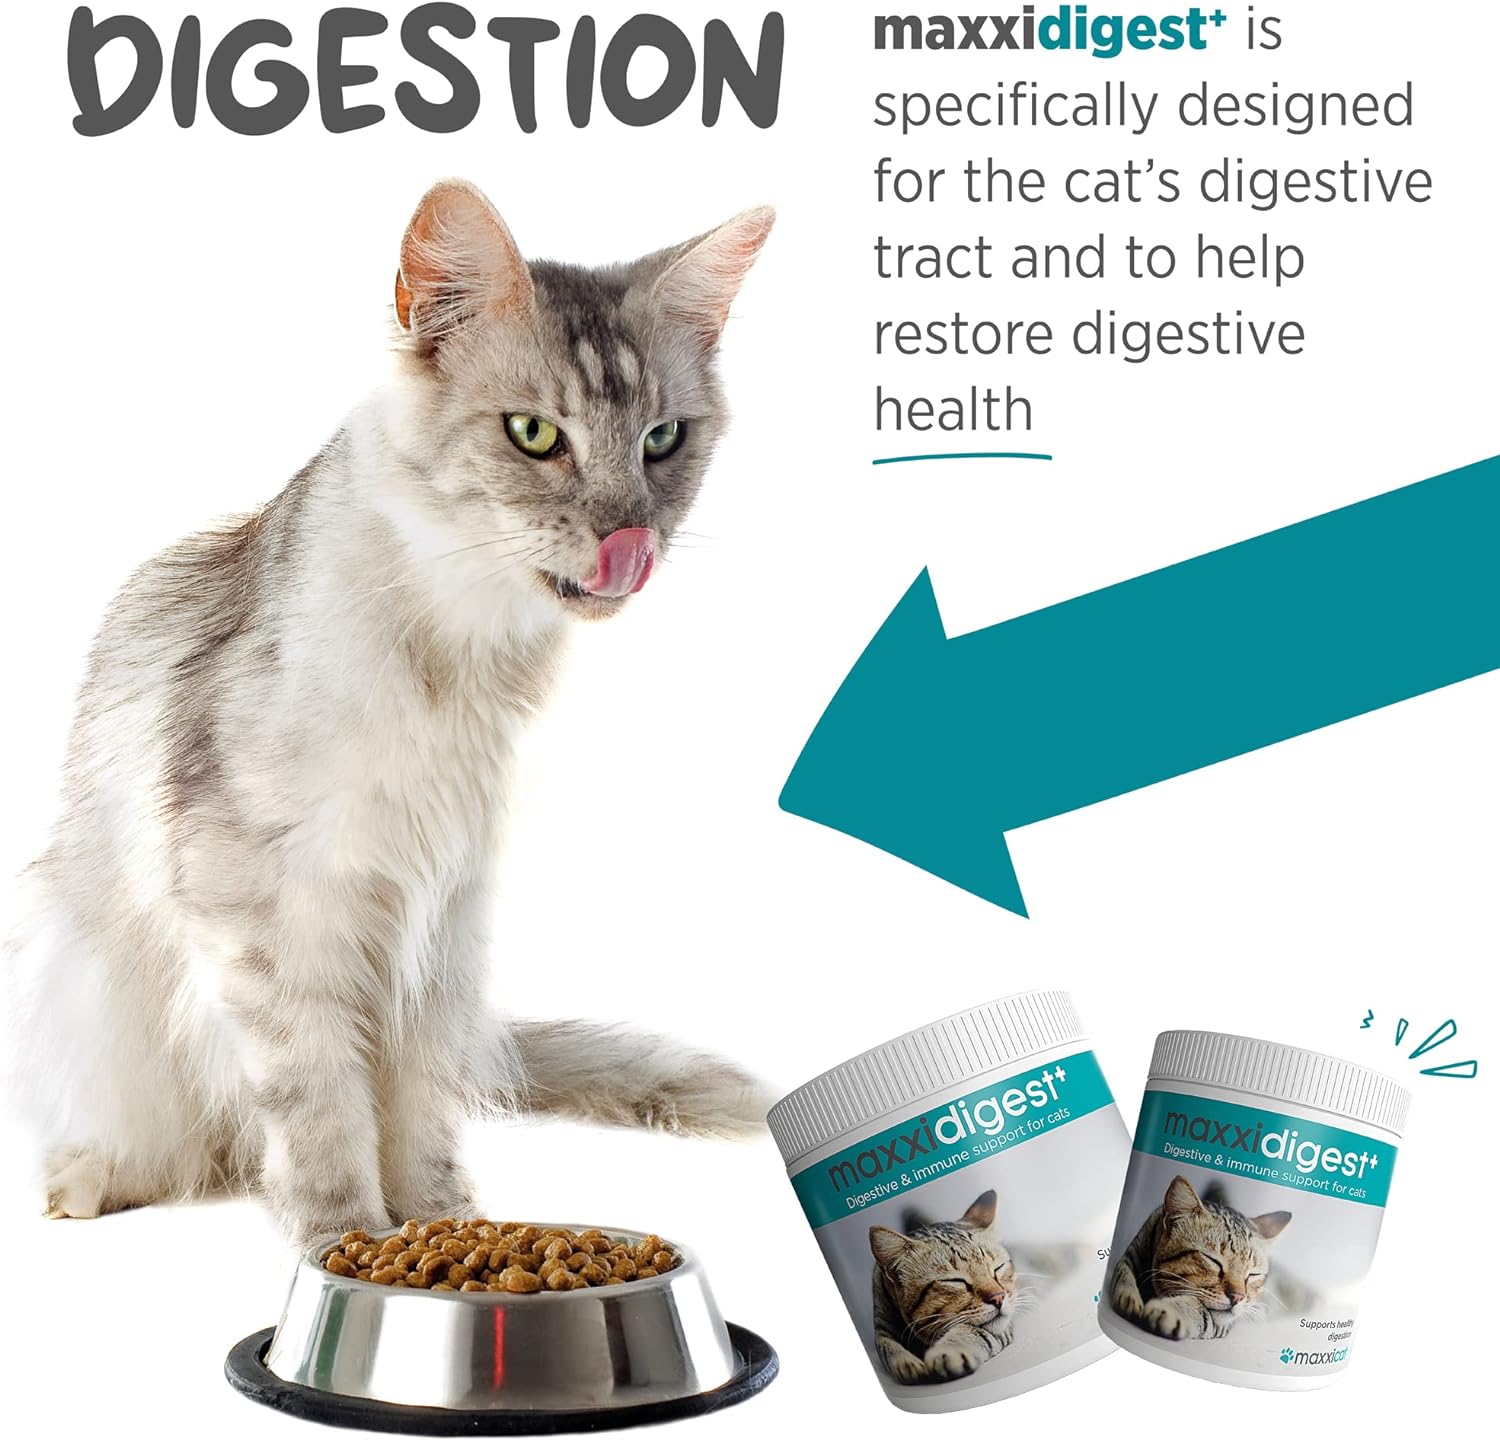 maxxipaws maxxidigest+ Digestive and Immune Support Supplement for Cats with Probiotics, Prebiotics and Digestive Enzymes – 7 oz : Pet Supplies